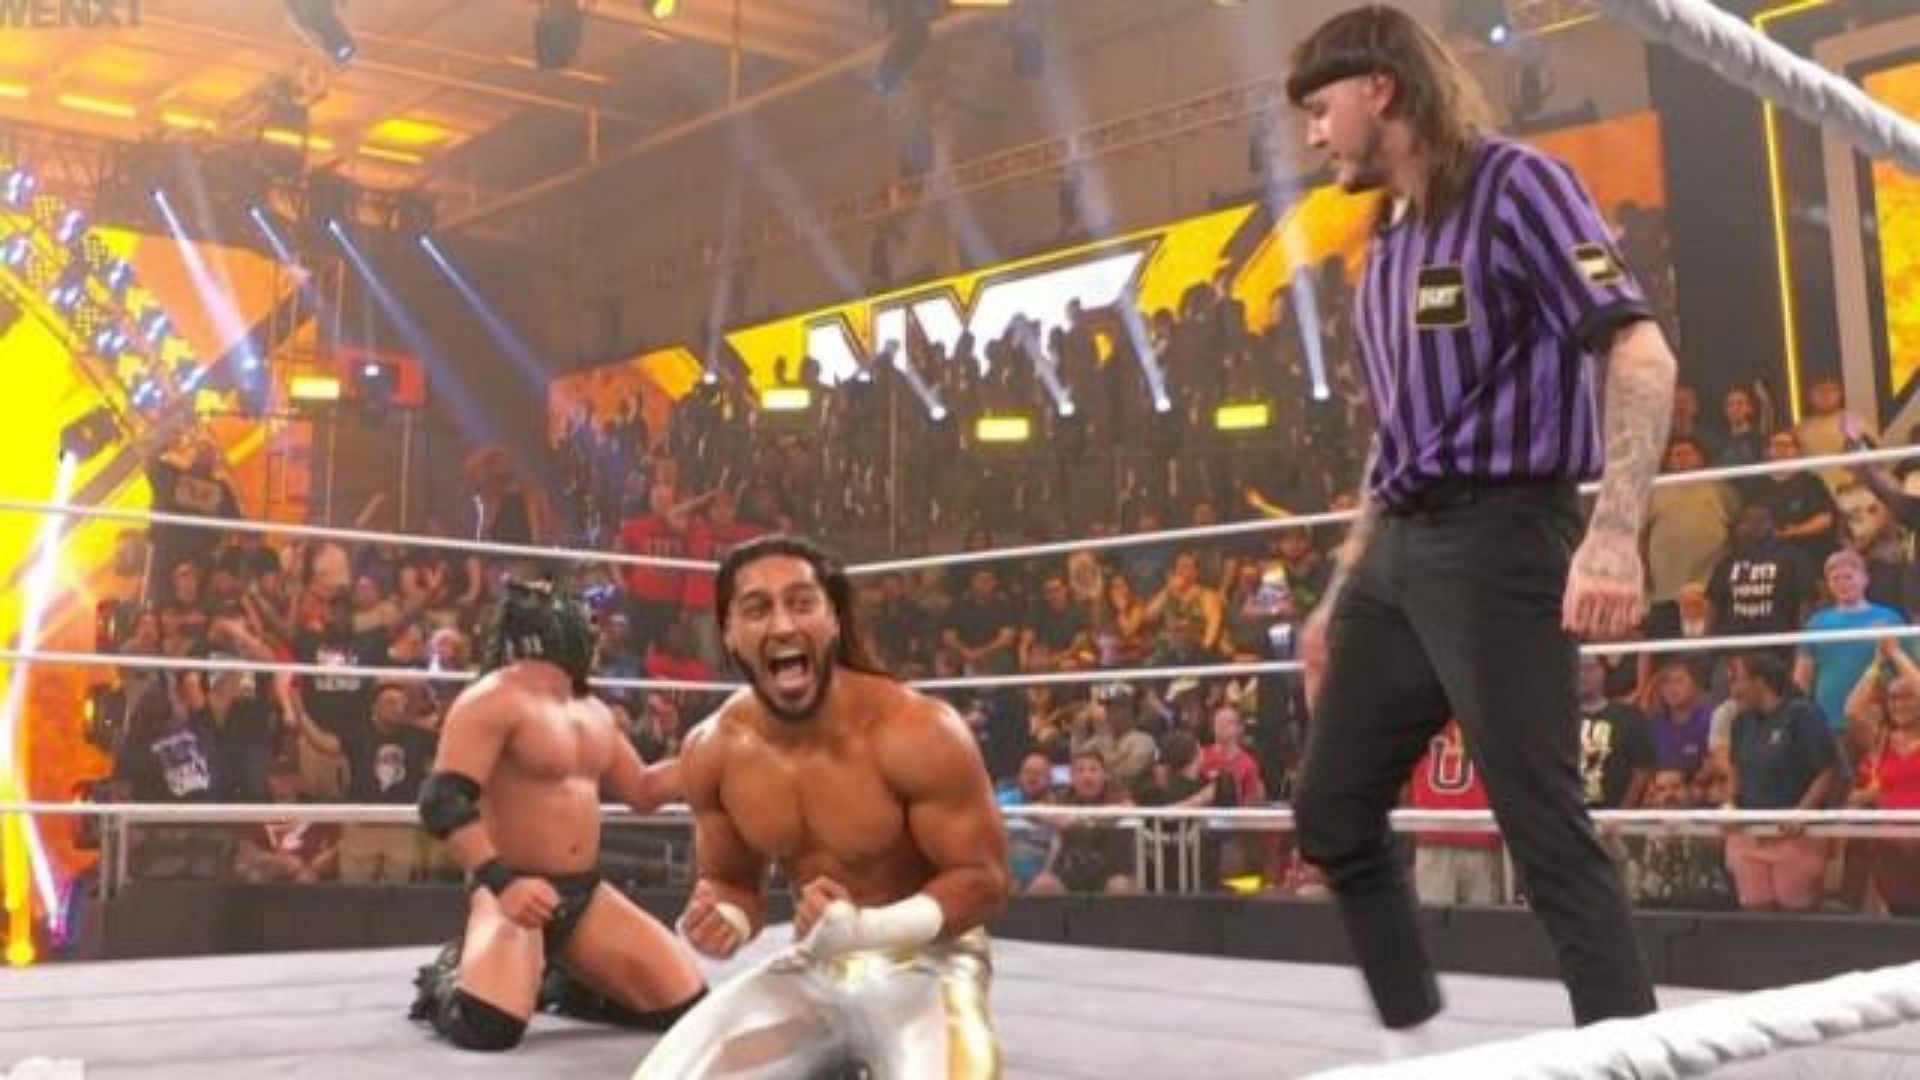 Mustafa Ali will challenge Dominik for his title at NXT No mercy